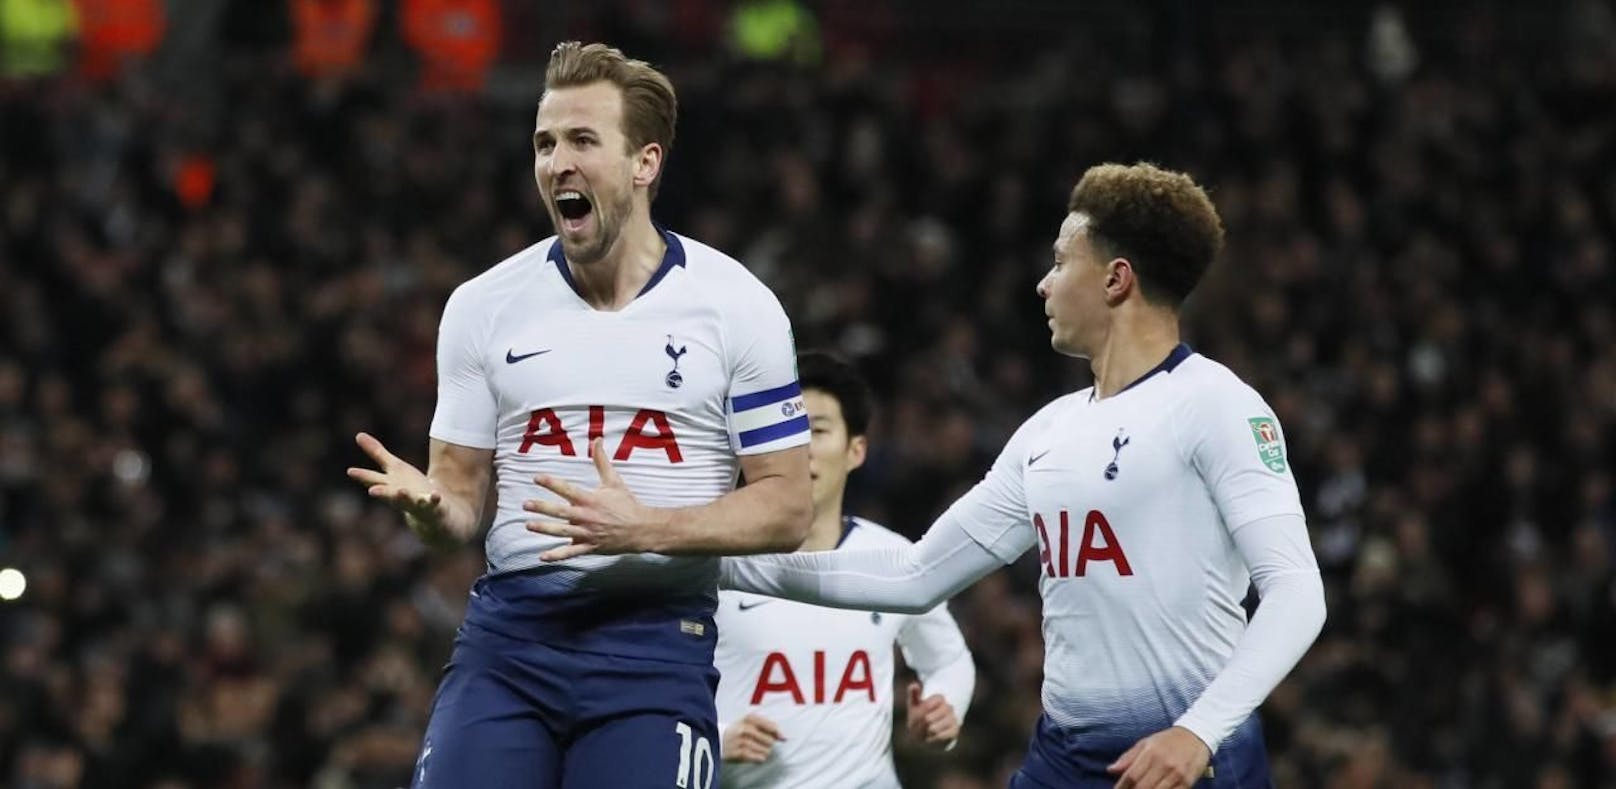 Harry Kane of Tottenham celebrates scoring the first goal during the Carabao Cup Semi Final First leg match at Wembley Stadium, London. Picture date: 8th January 2019. Picture credit should read: David Klein/Sportimage PUBLICATIONxNOTxINxUK _1DK4272.JPG  